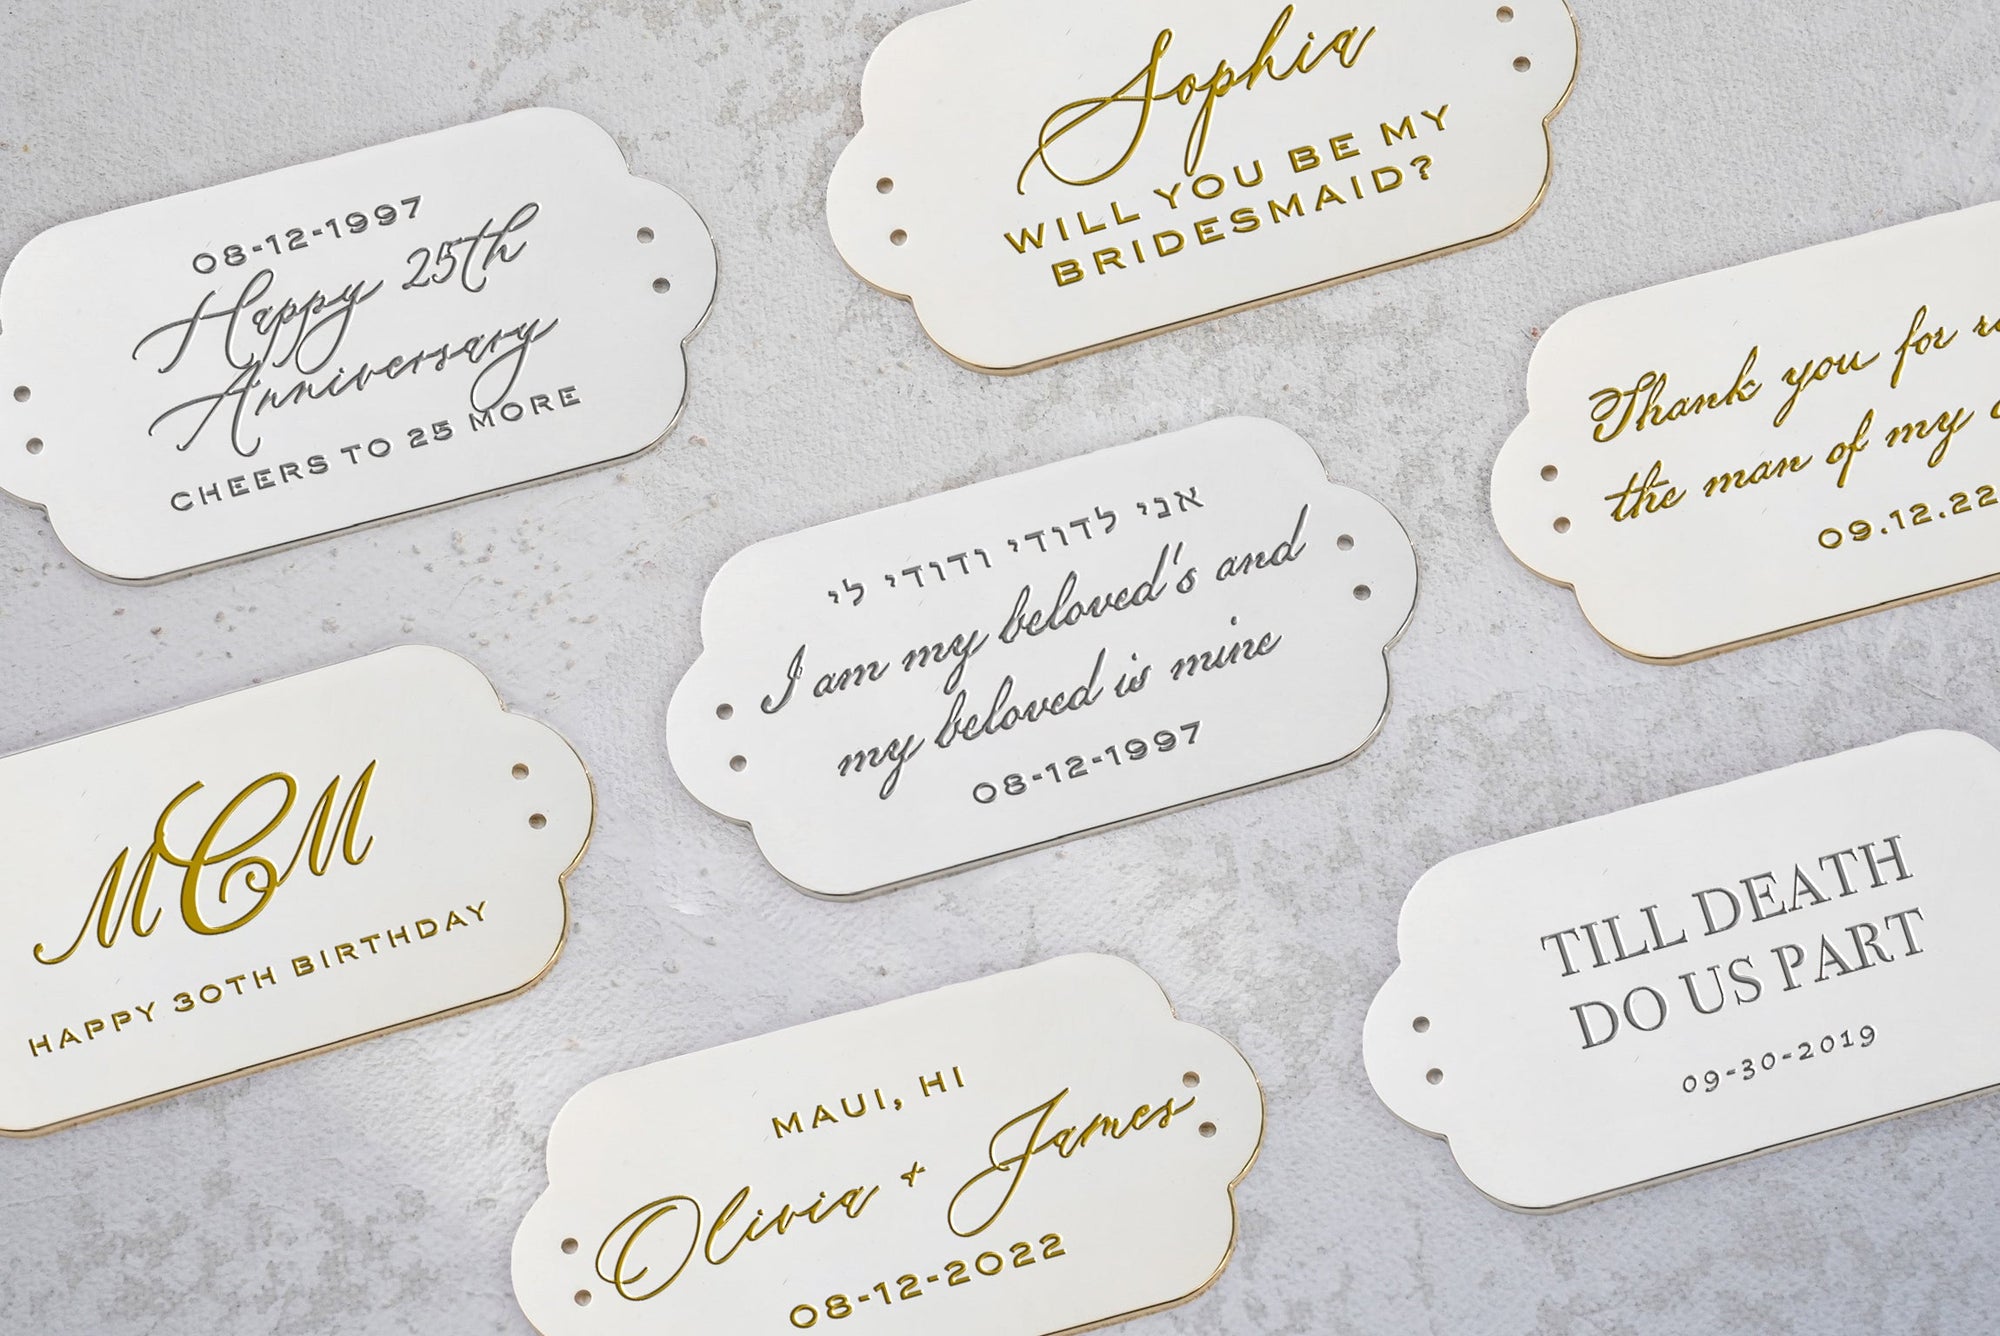 A collection of elegant, personalized white and gold calligraphy cards for various occasions including anniversaries, weddings, and birthdays, perfect as a Bella Clutch True Love Pearl Petite from The Bella Rosa Collection wedding accessory.